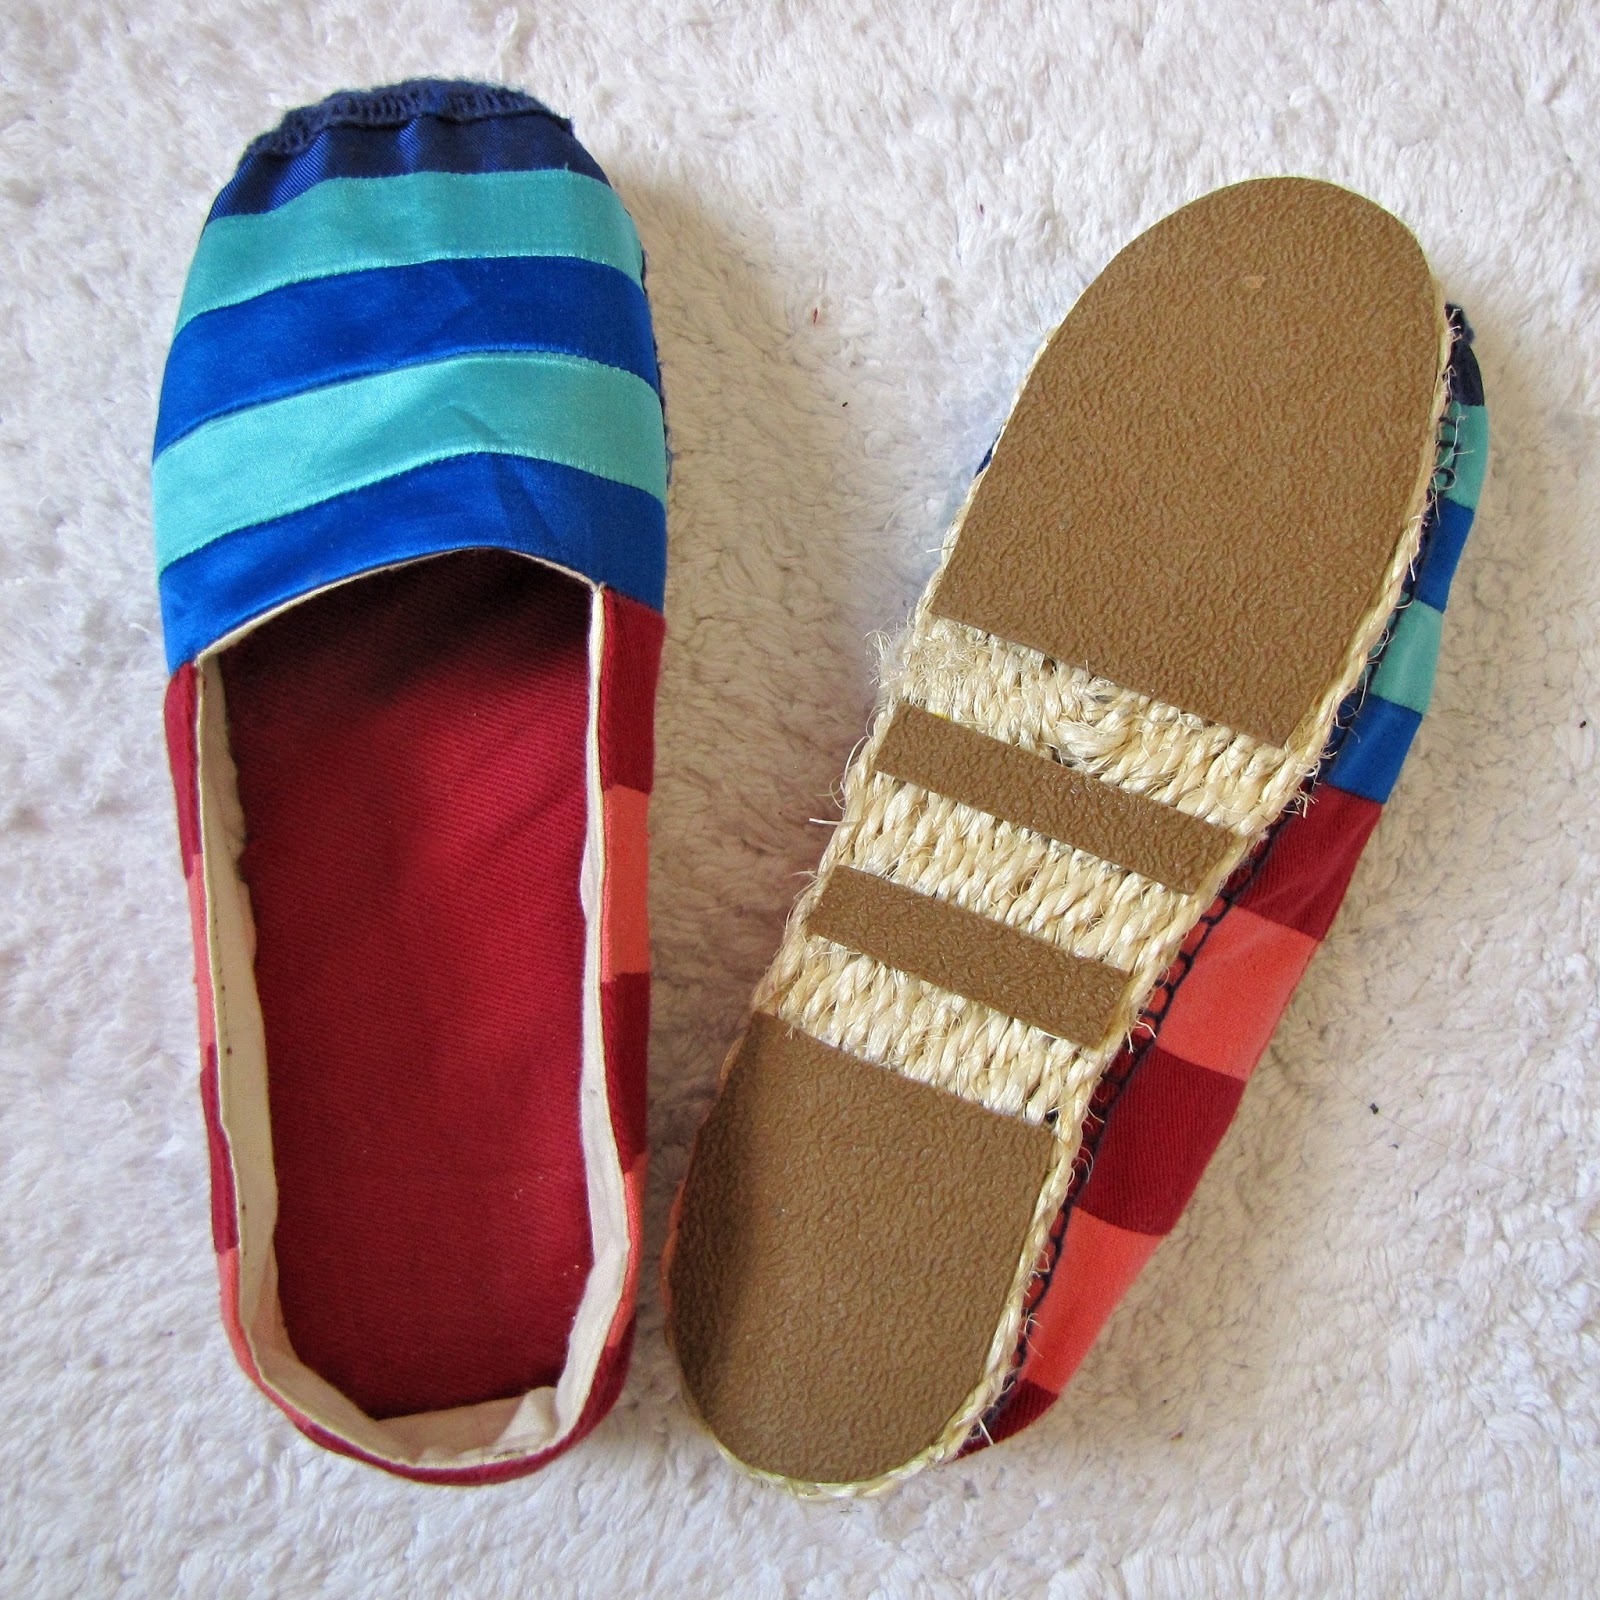 Of Dreams How to make (lined!) Espadrilles: Tutorial!